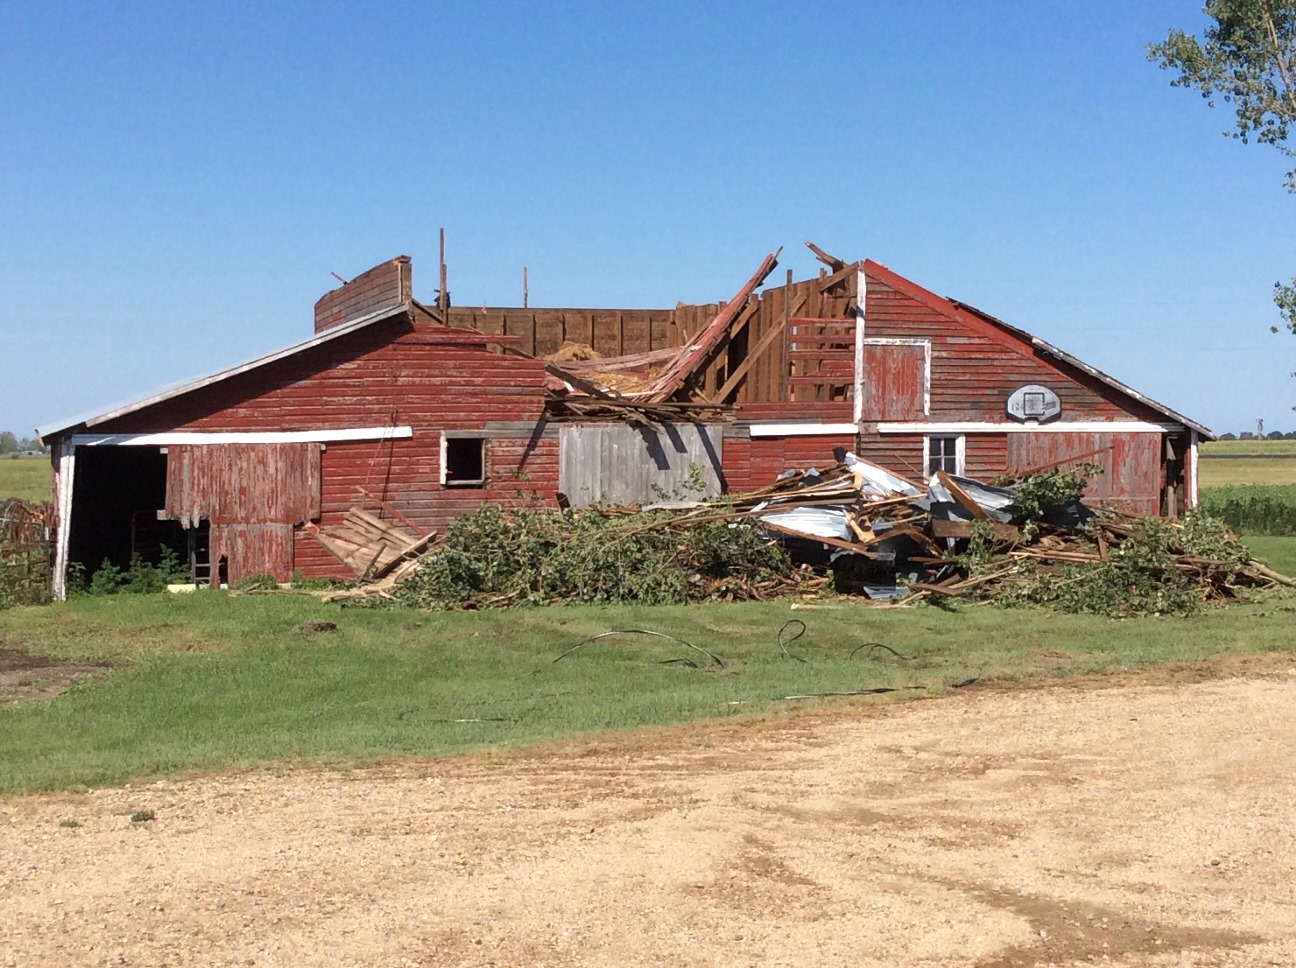 Damage to a barn located 1 mile east of Andover